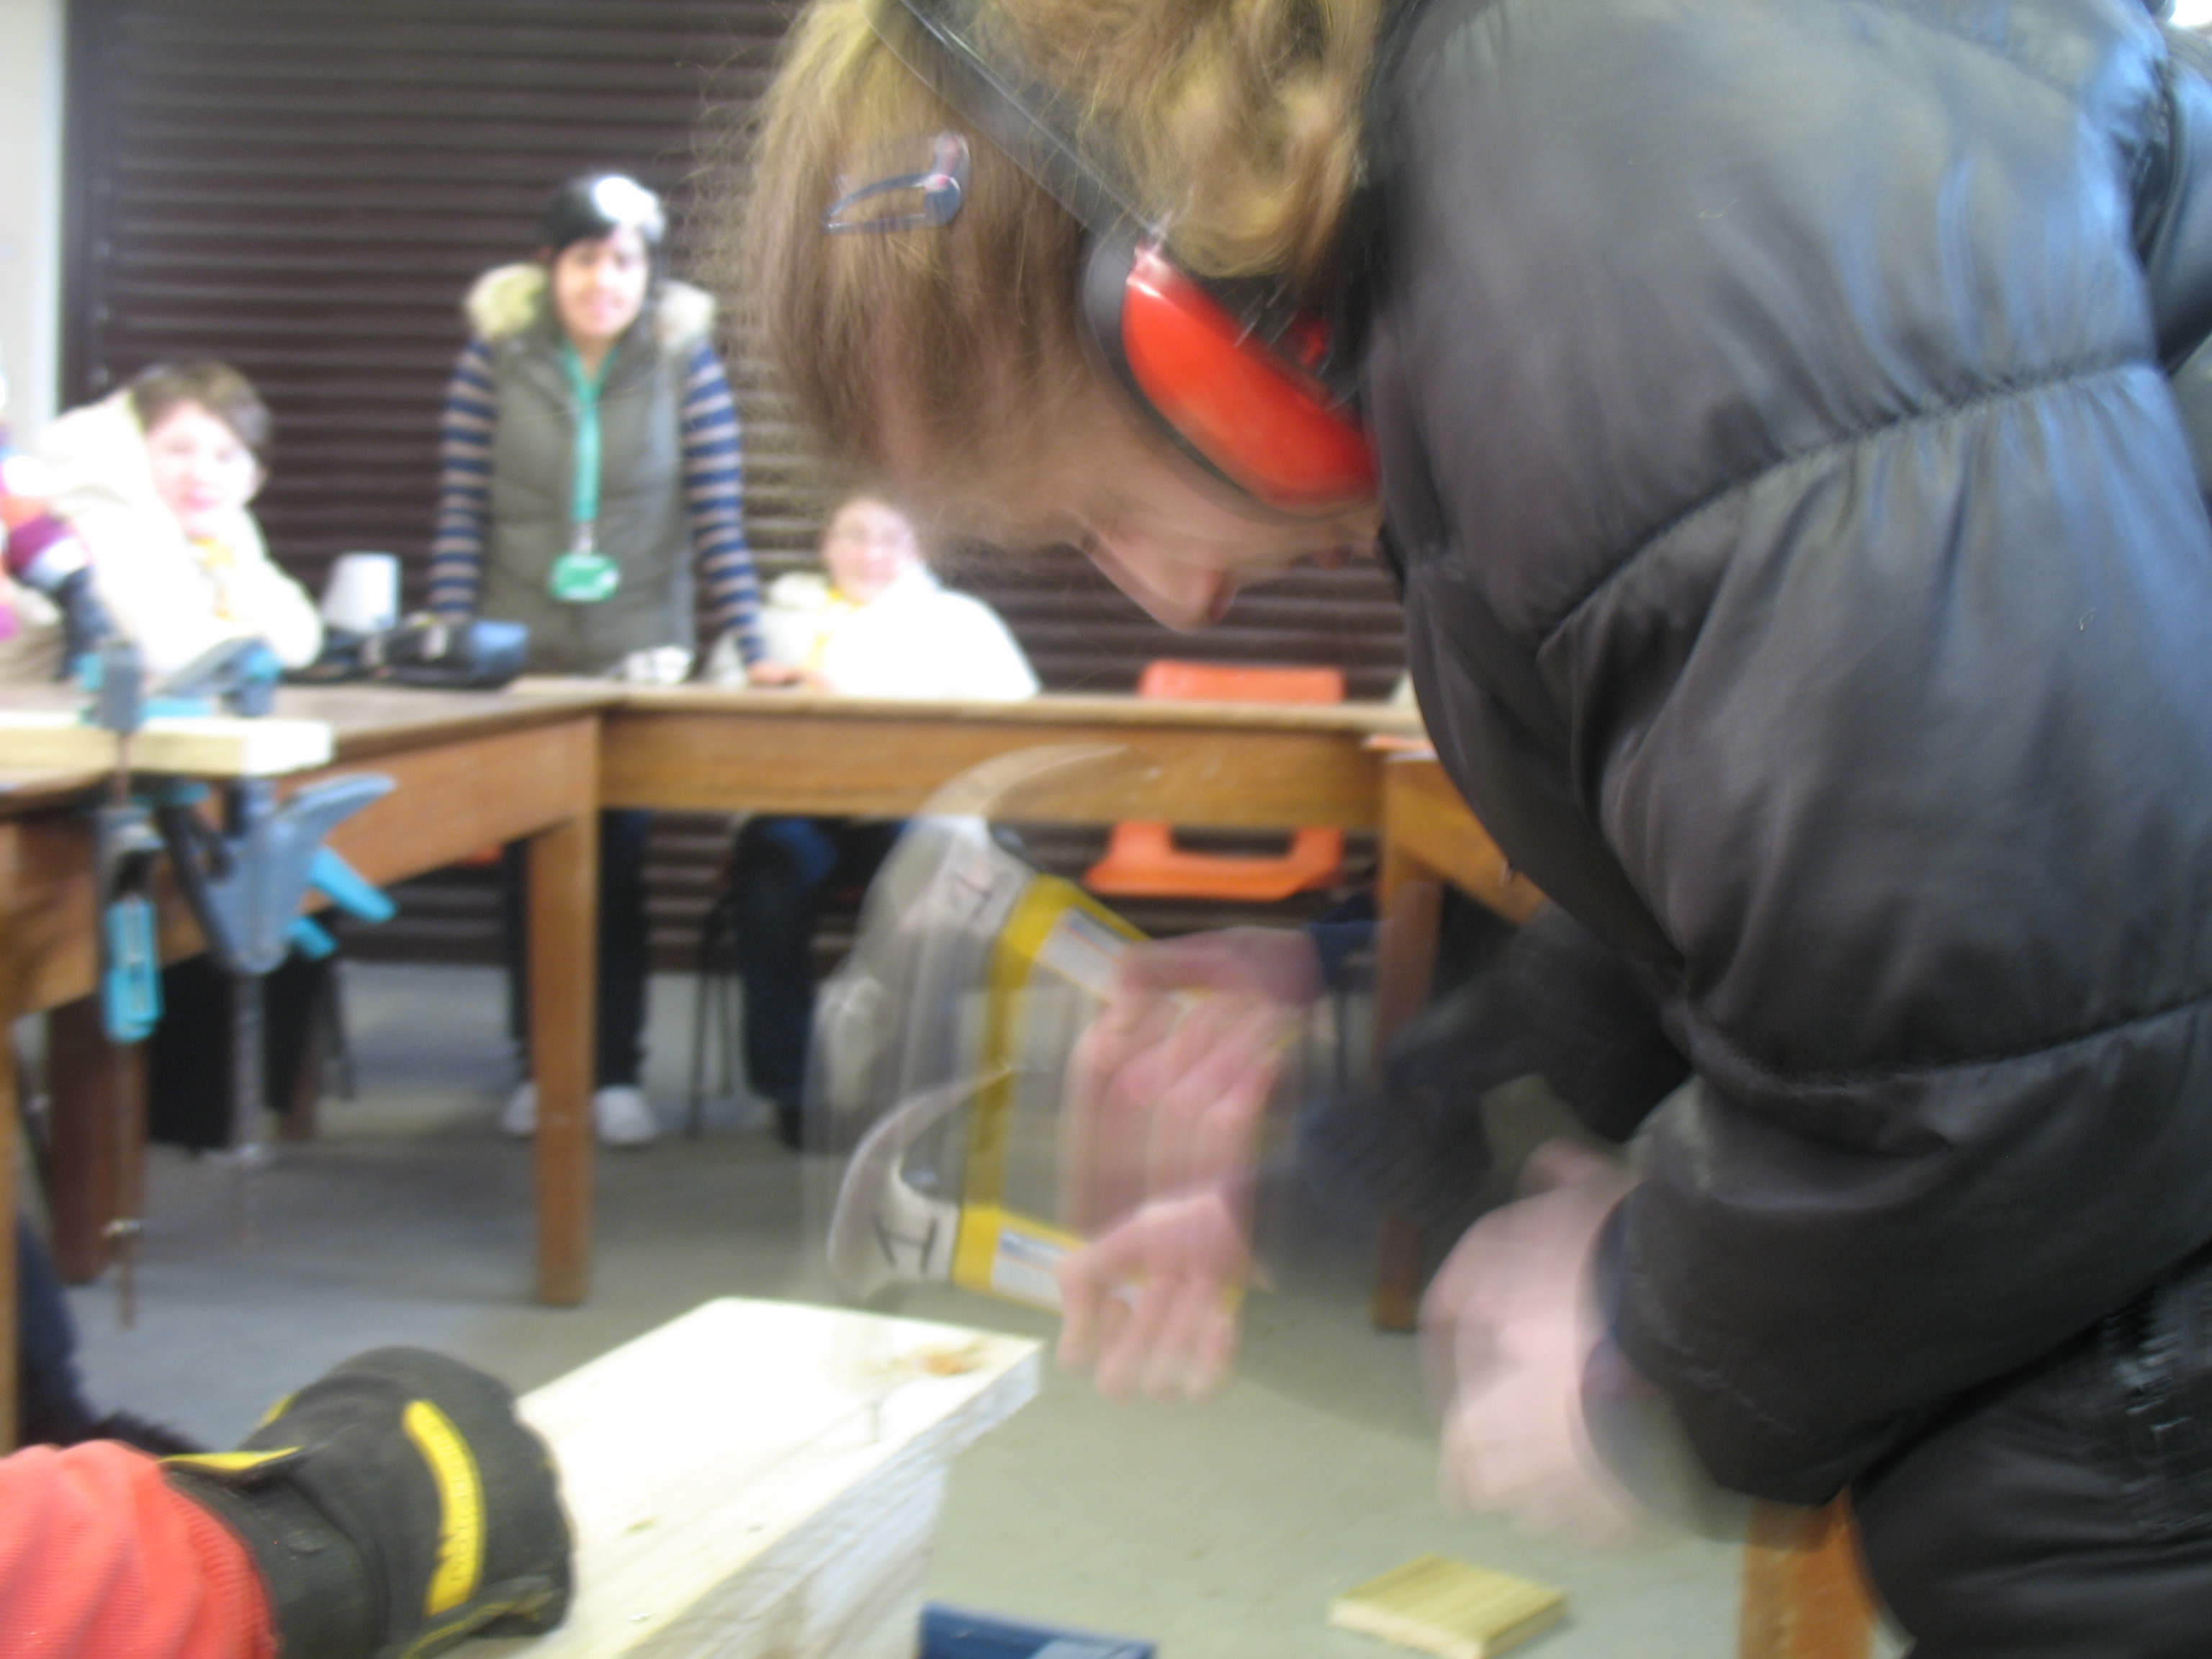 Woodwork at Myerscough College